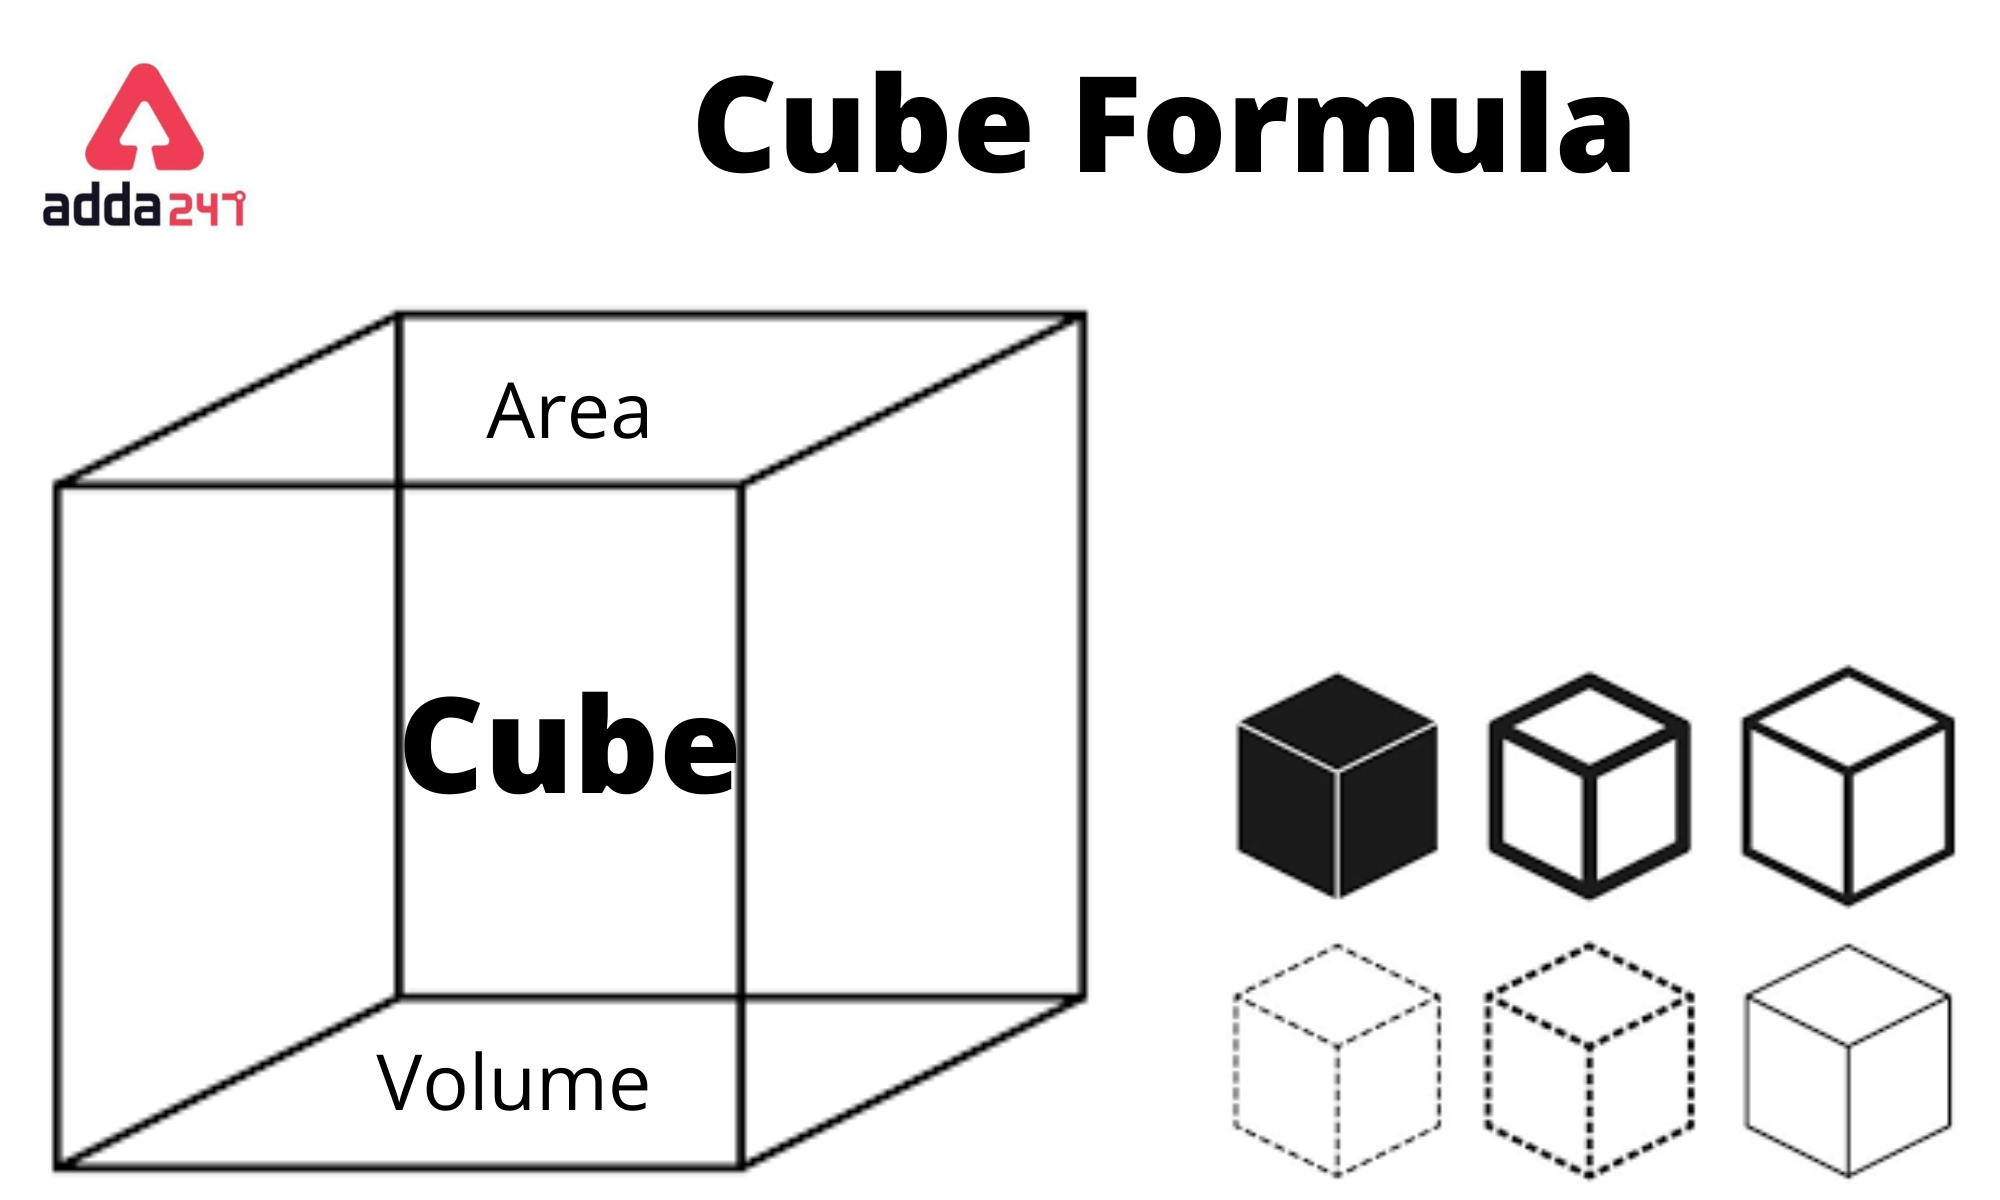 Volume of a Cube, How to Calculate the Volume of a Cube?